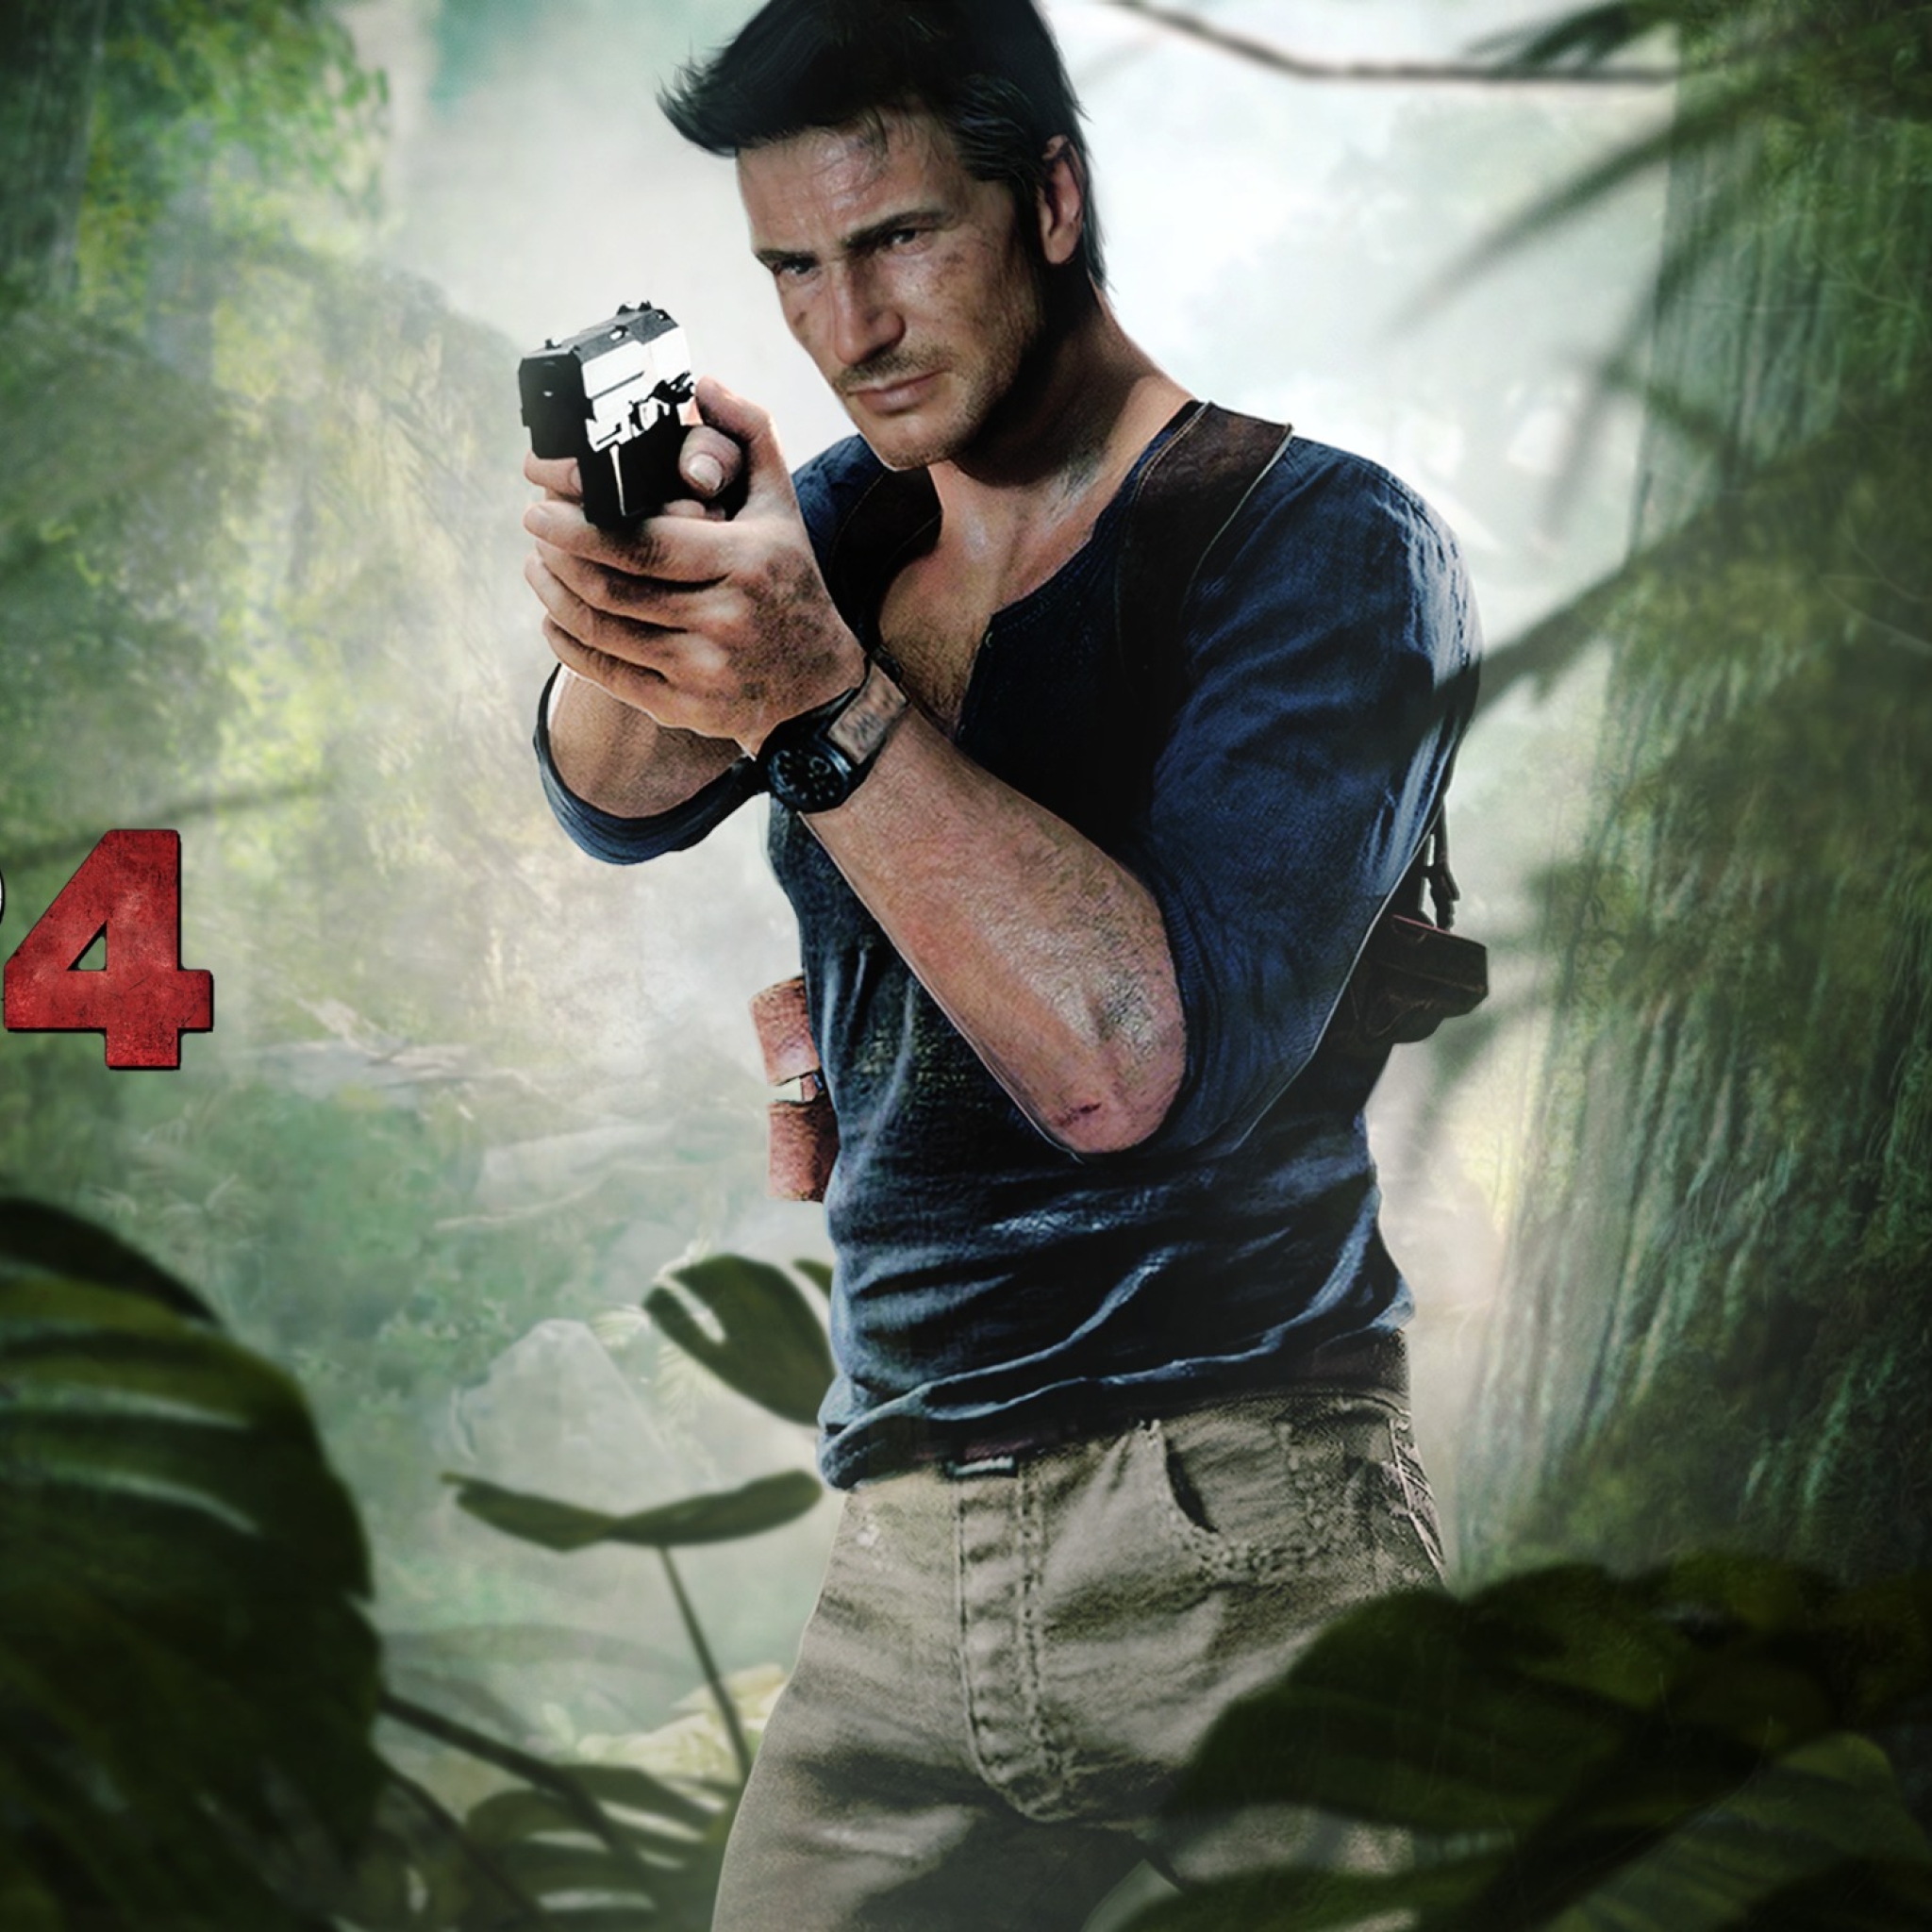 uncharted 4 pc game kickass